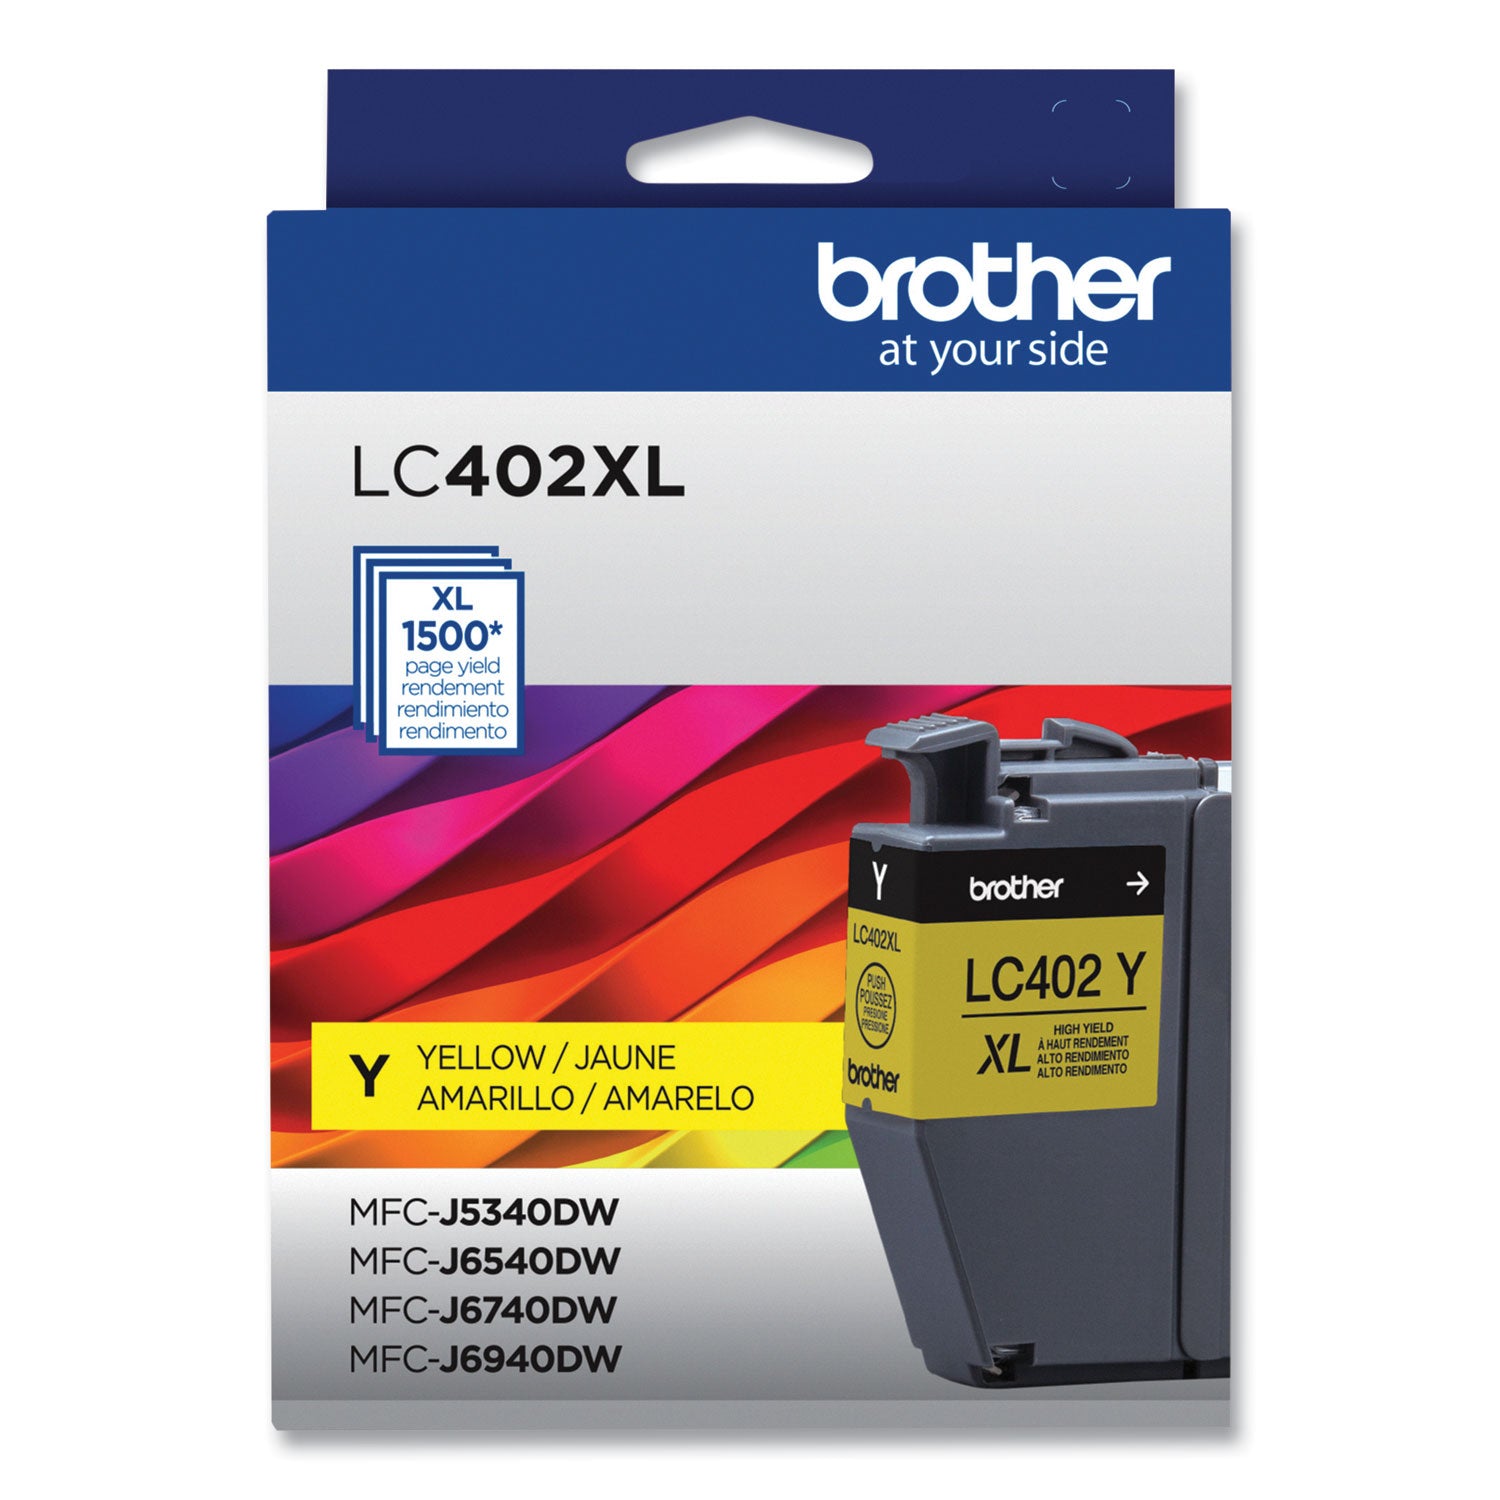 lc402xlys-high-yield-ink-1500-page-yield-yellow_brtlc402xlys - 1